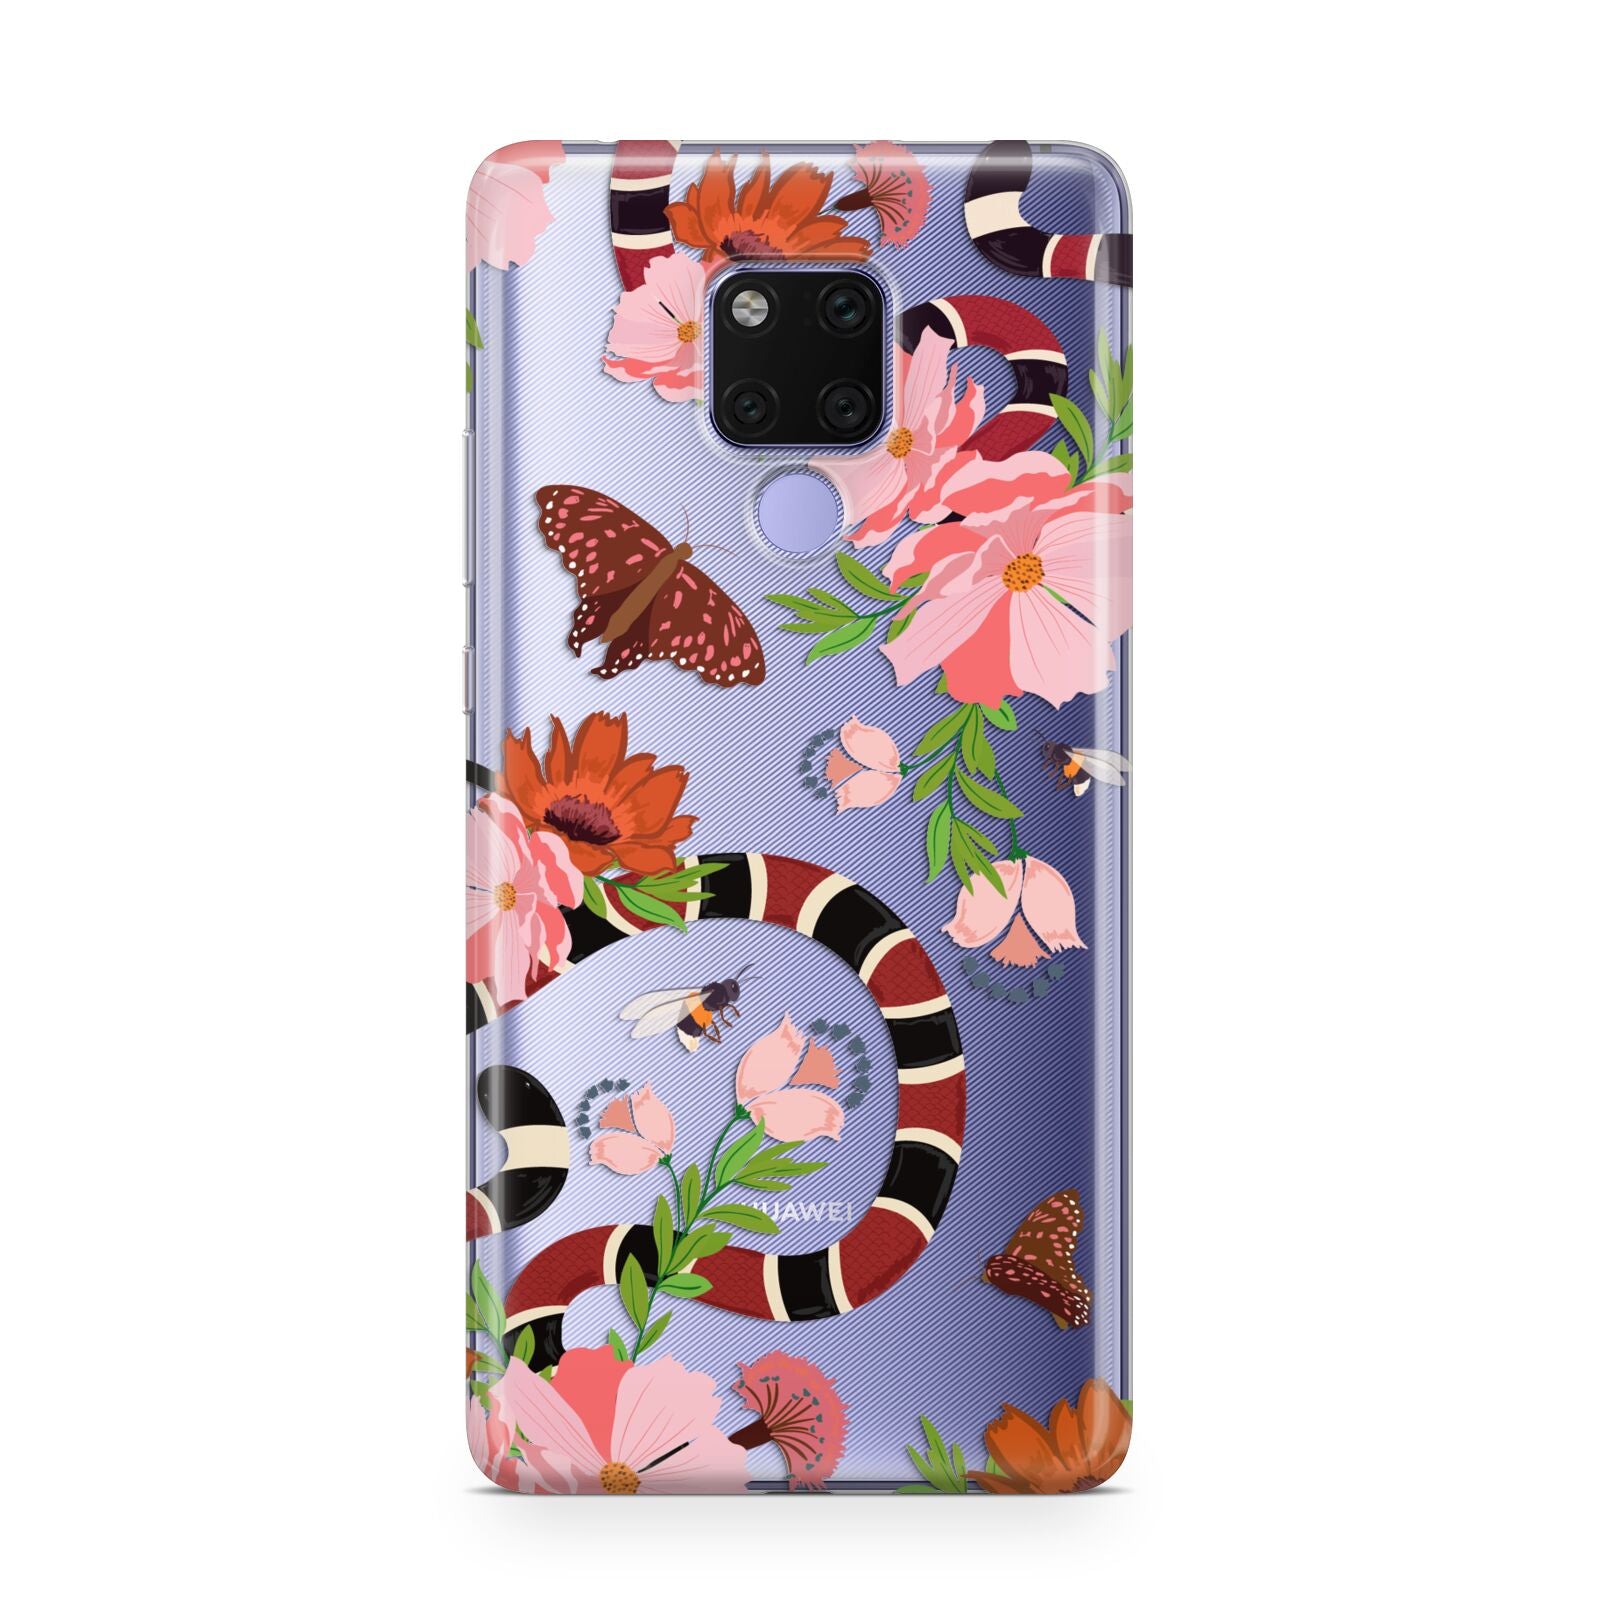 Floral Snake Huawei Mate 20X Phone Case